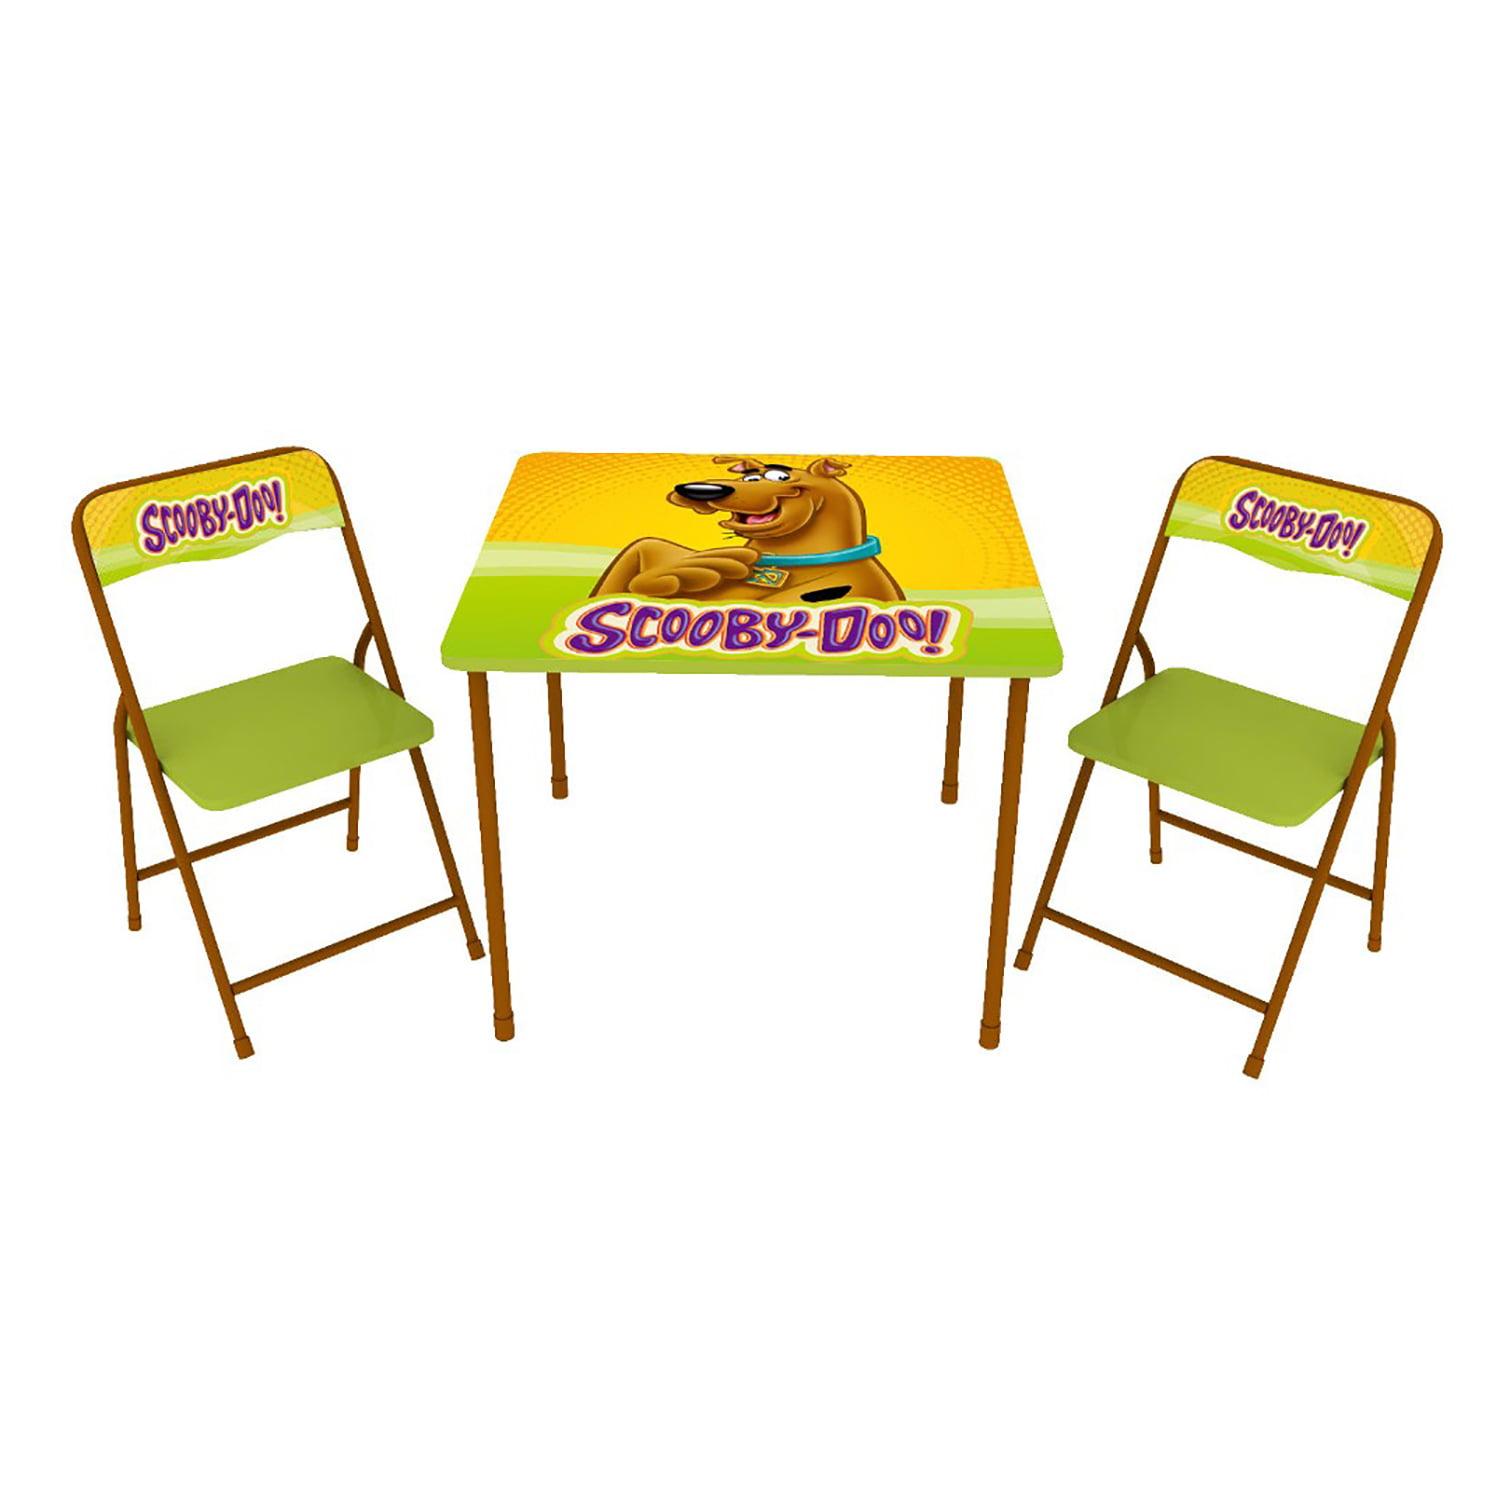 childrens metal table and chair set